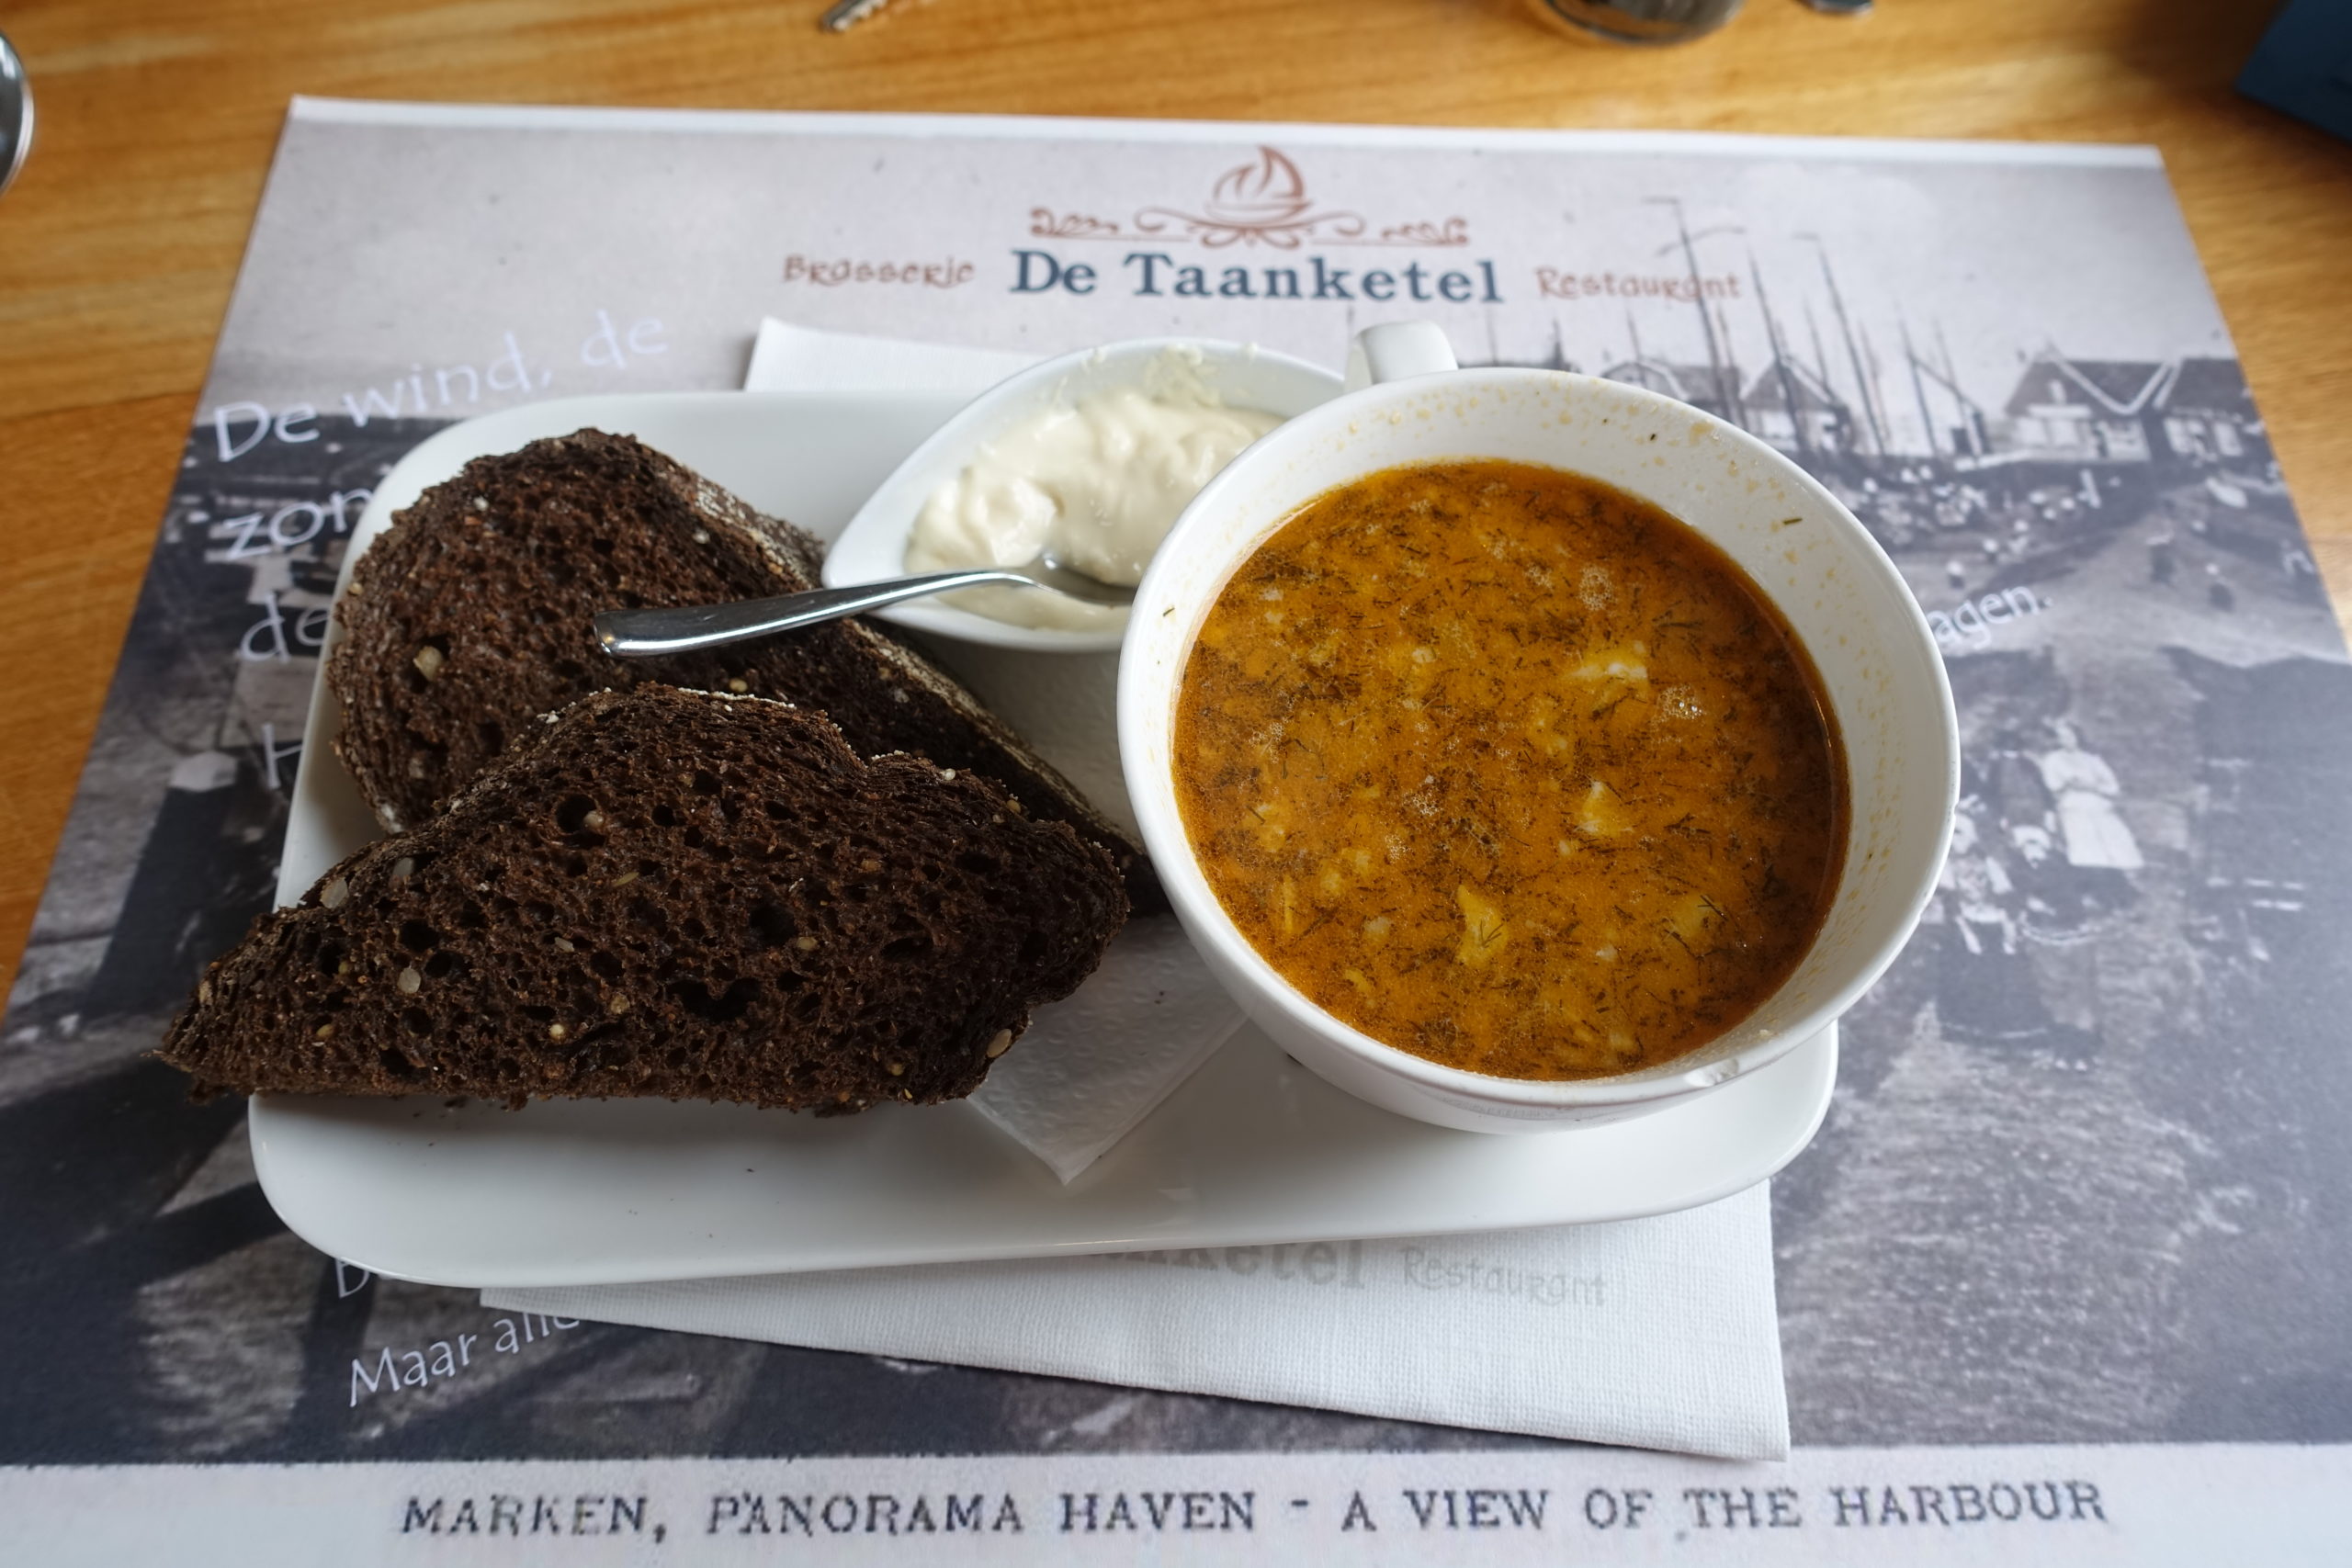 A plate of fish soup at the Tanketeel restaurant in the Marken Harbor